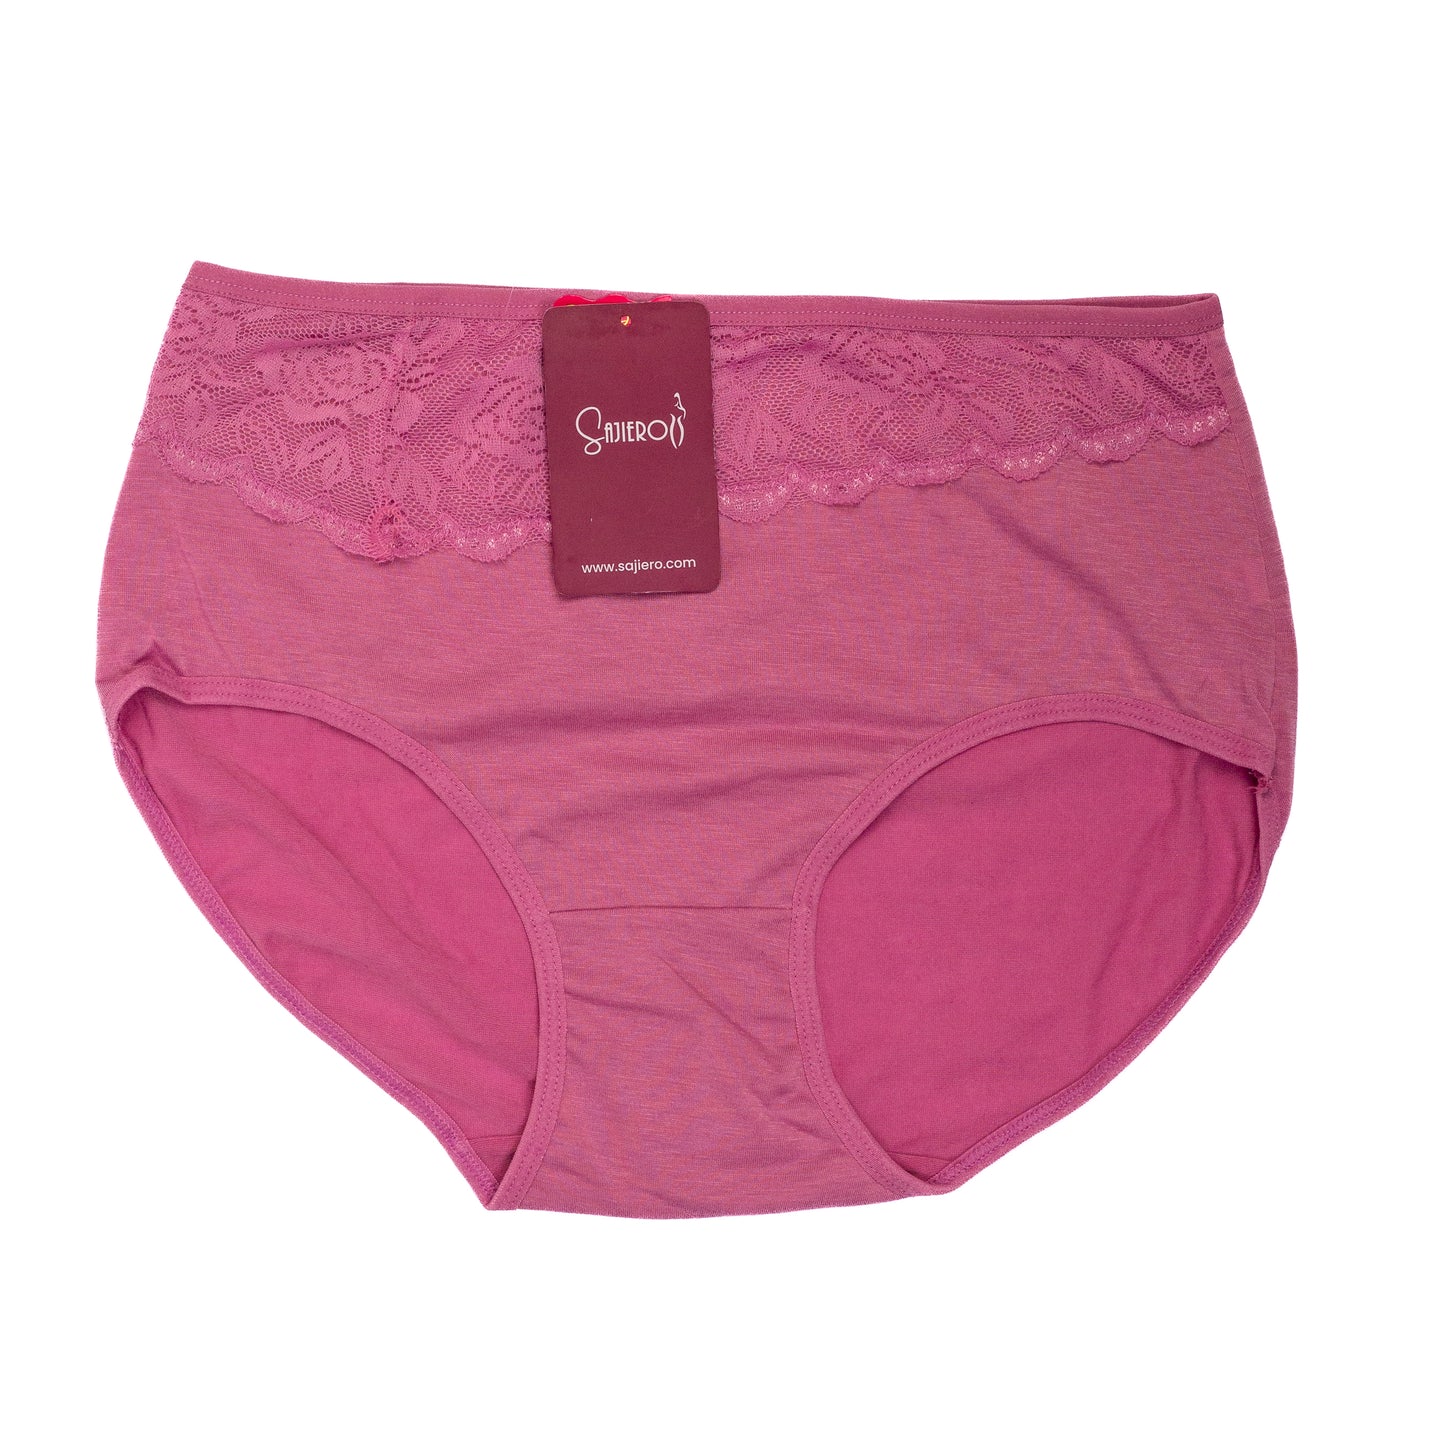 Net Style Brief Cotton Panty